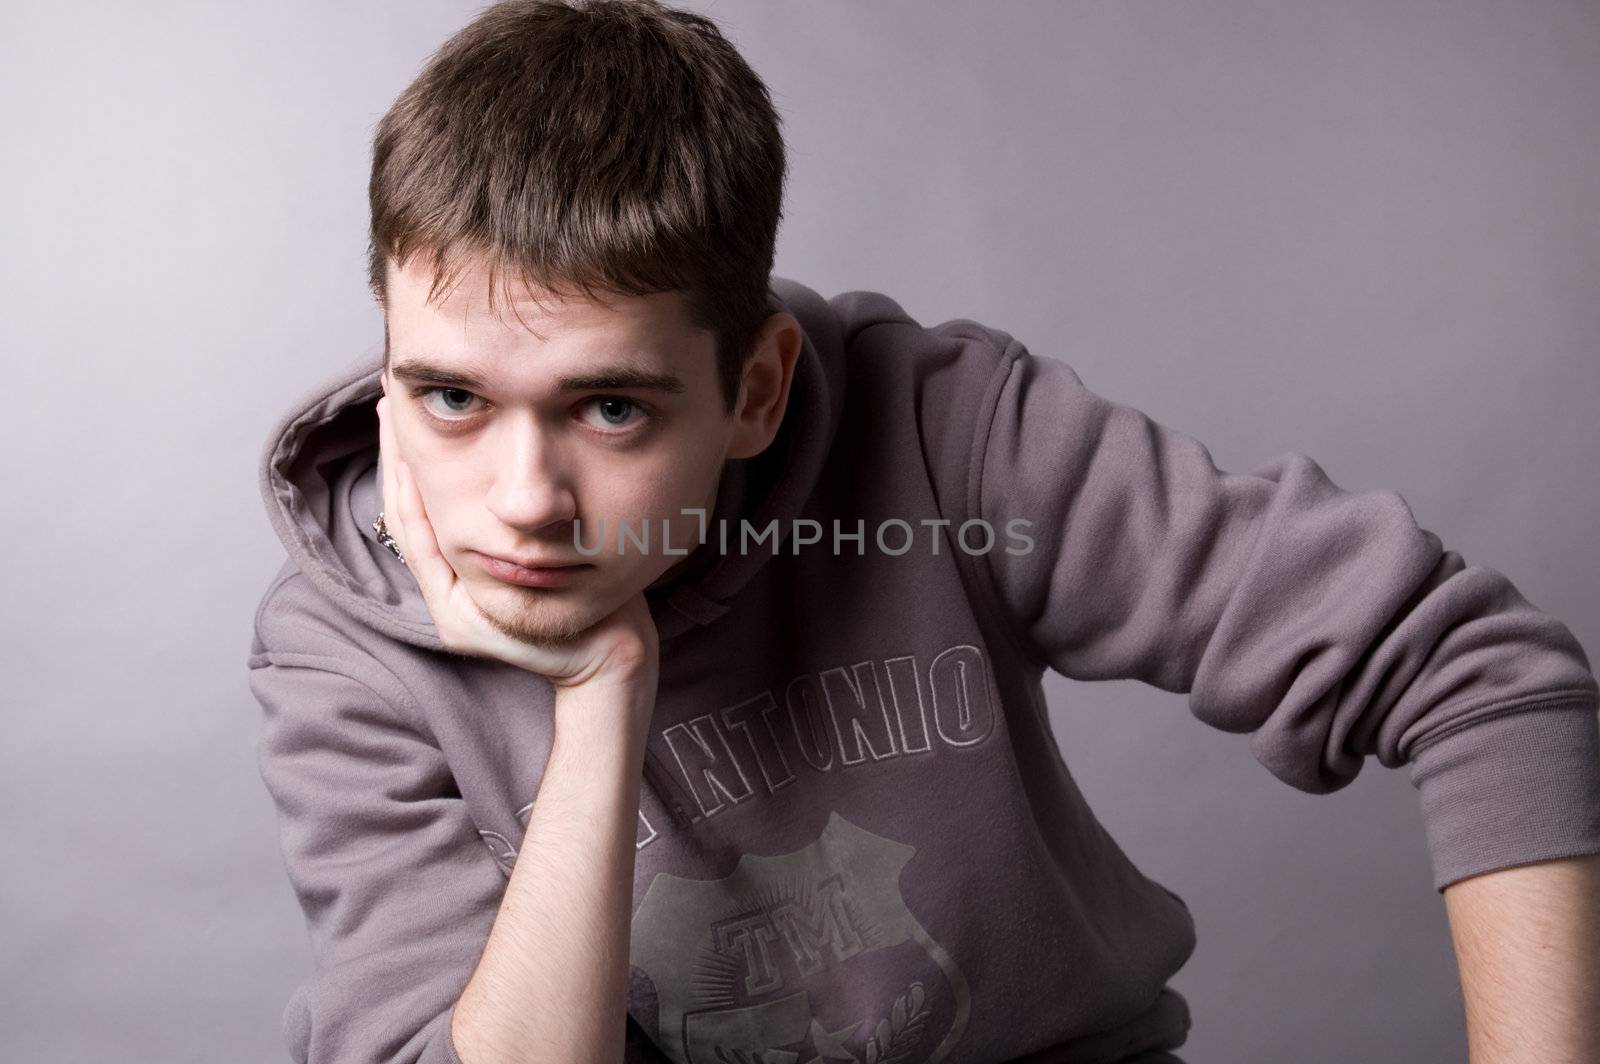 The young guy in studio on a grey background